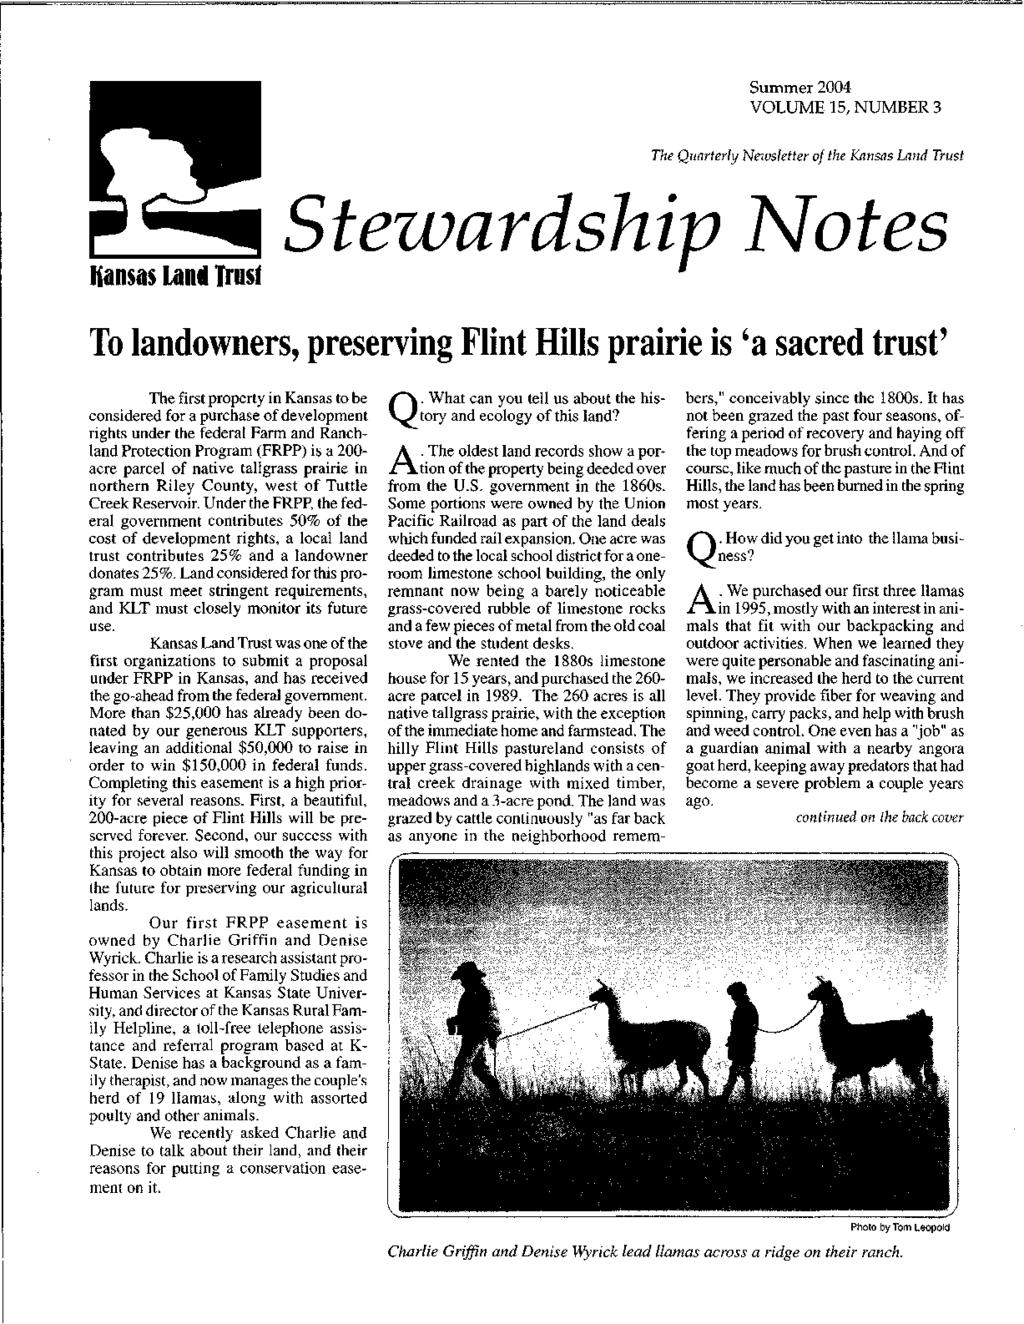 Summer 2004 VOLUME 15, NUMBER 3 The Quarterly Newsletter of the Kansas Land Trust I{ansas land Trusf Stewardship otes To landowners, preserving Flint Hills prairie is 'a sacred trust' The first